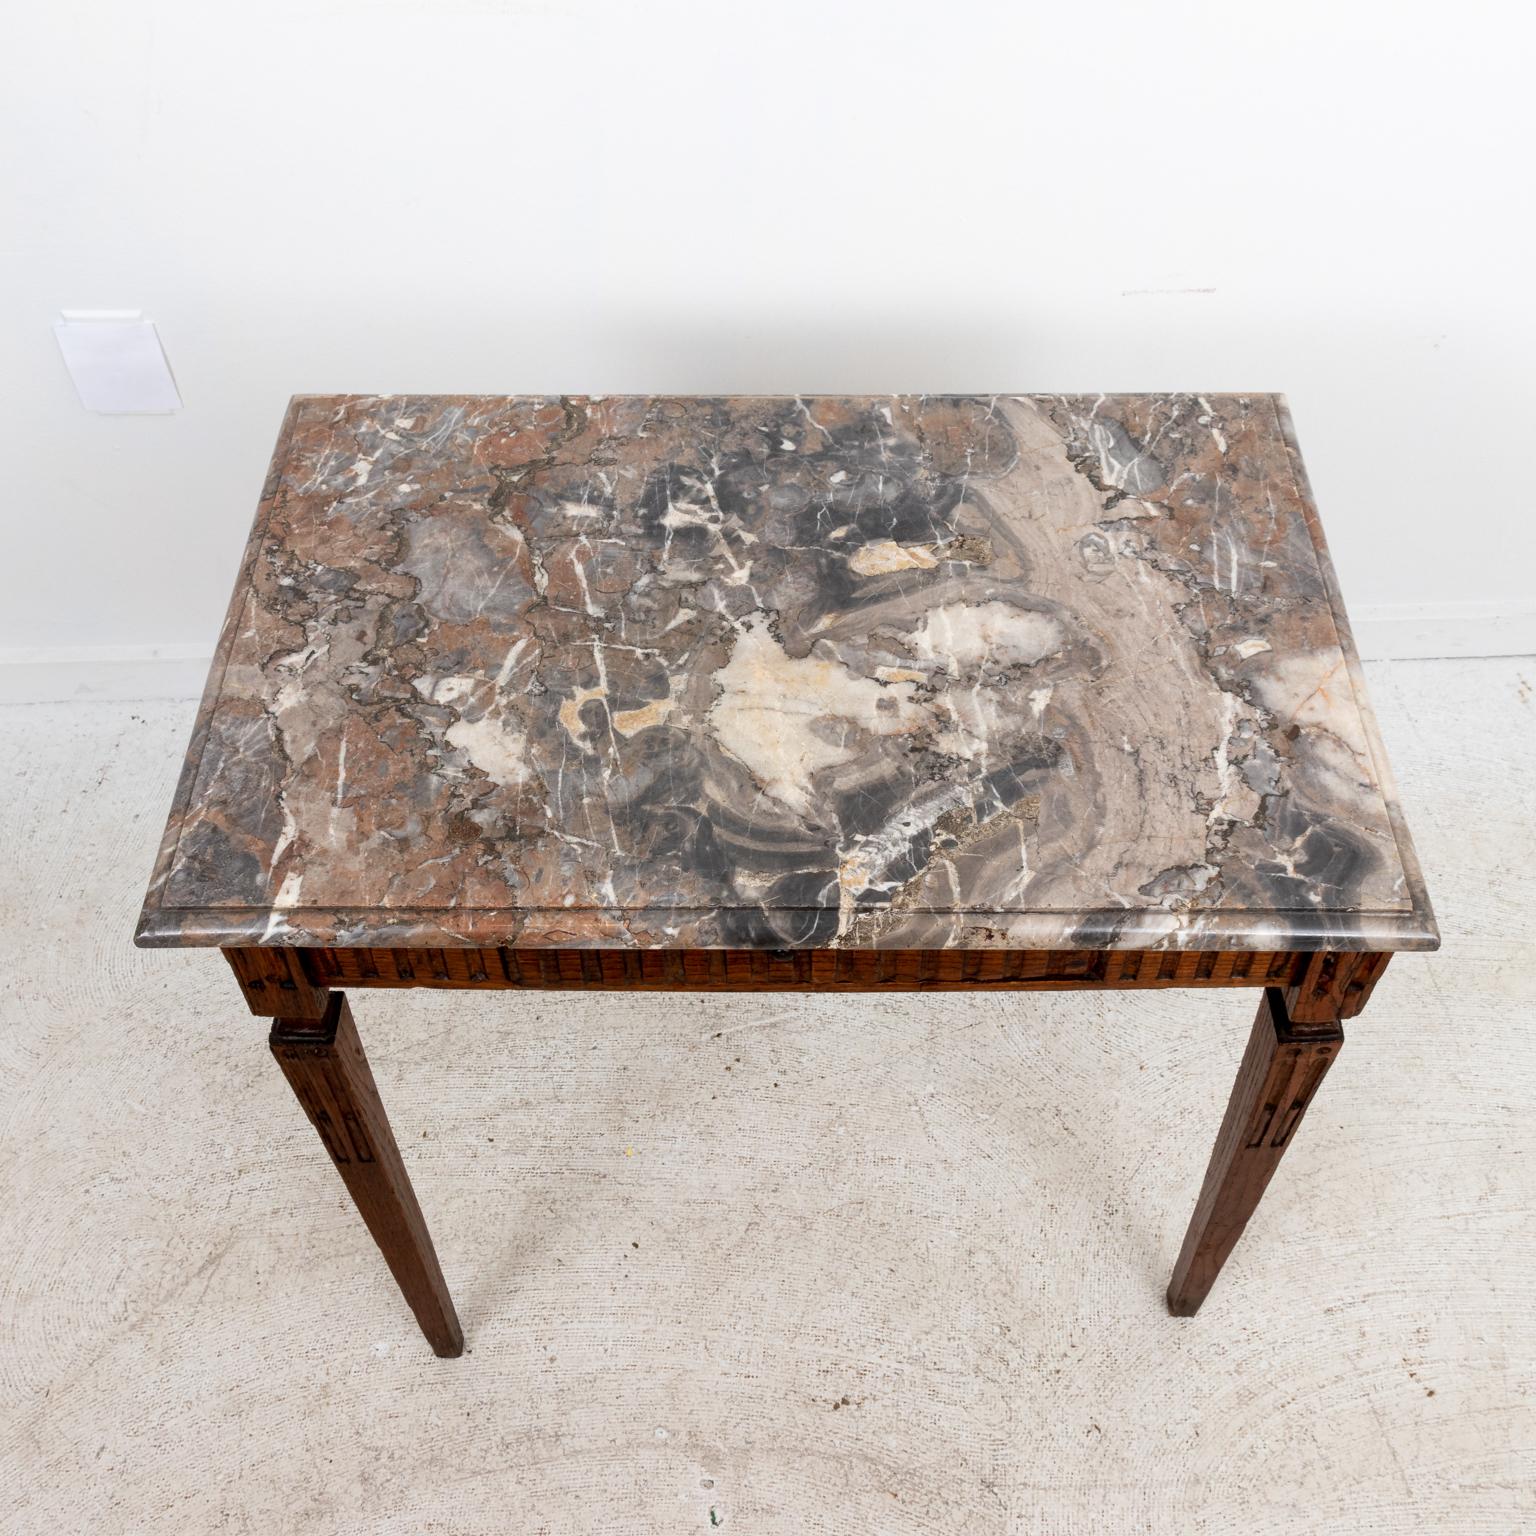 Circa 19th century Louis XVI style oak and marble top side table with tapered legs and single hidden drawer. Please note of wear consistent with age including minor finish loss to the wood.